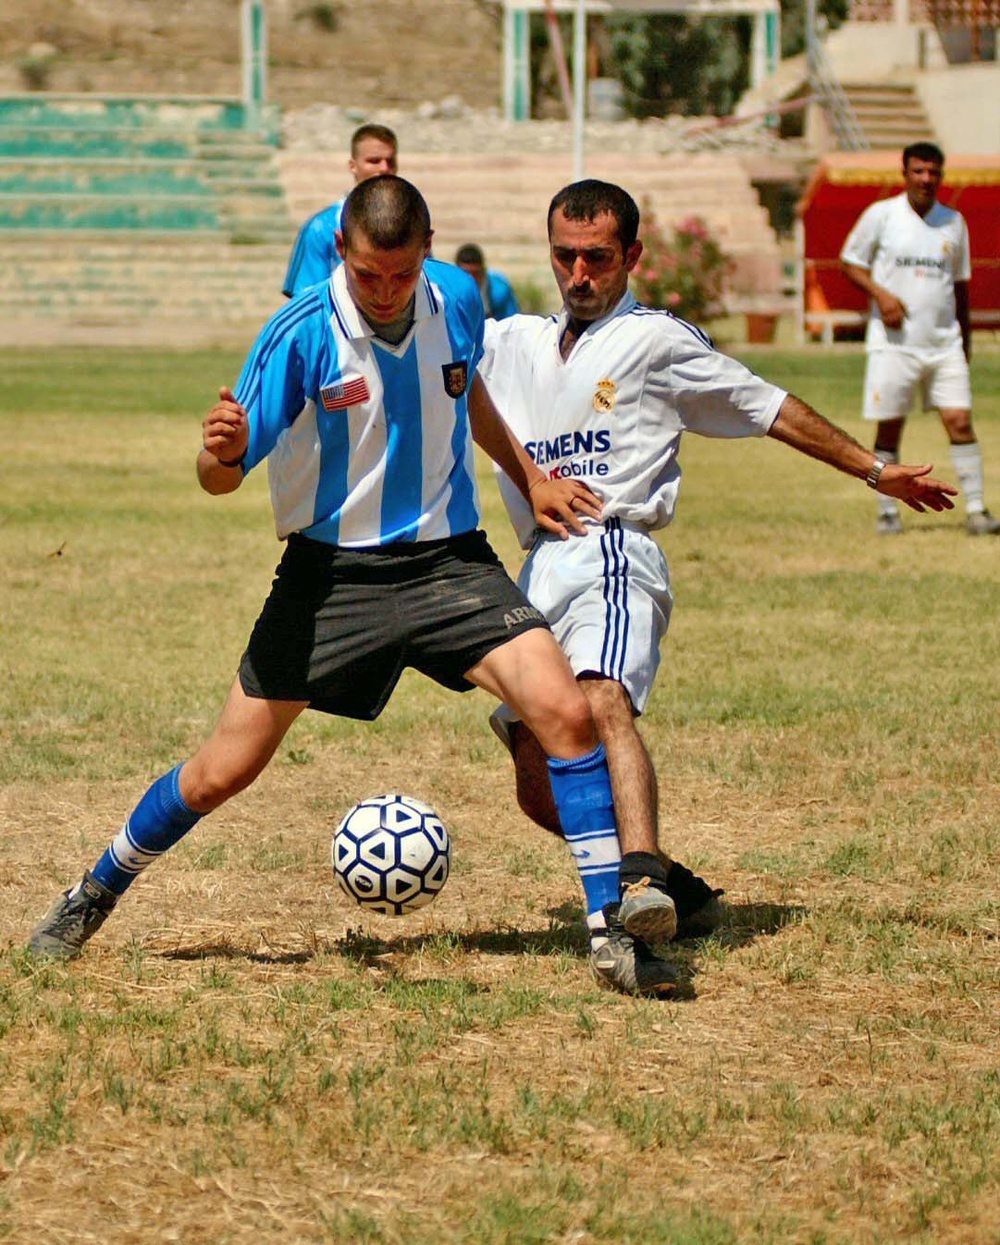 Iraqi and US Soldiers have a friendly game of soccer.